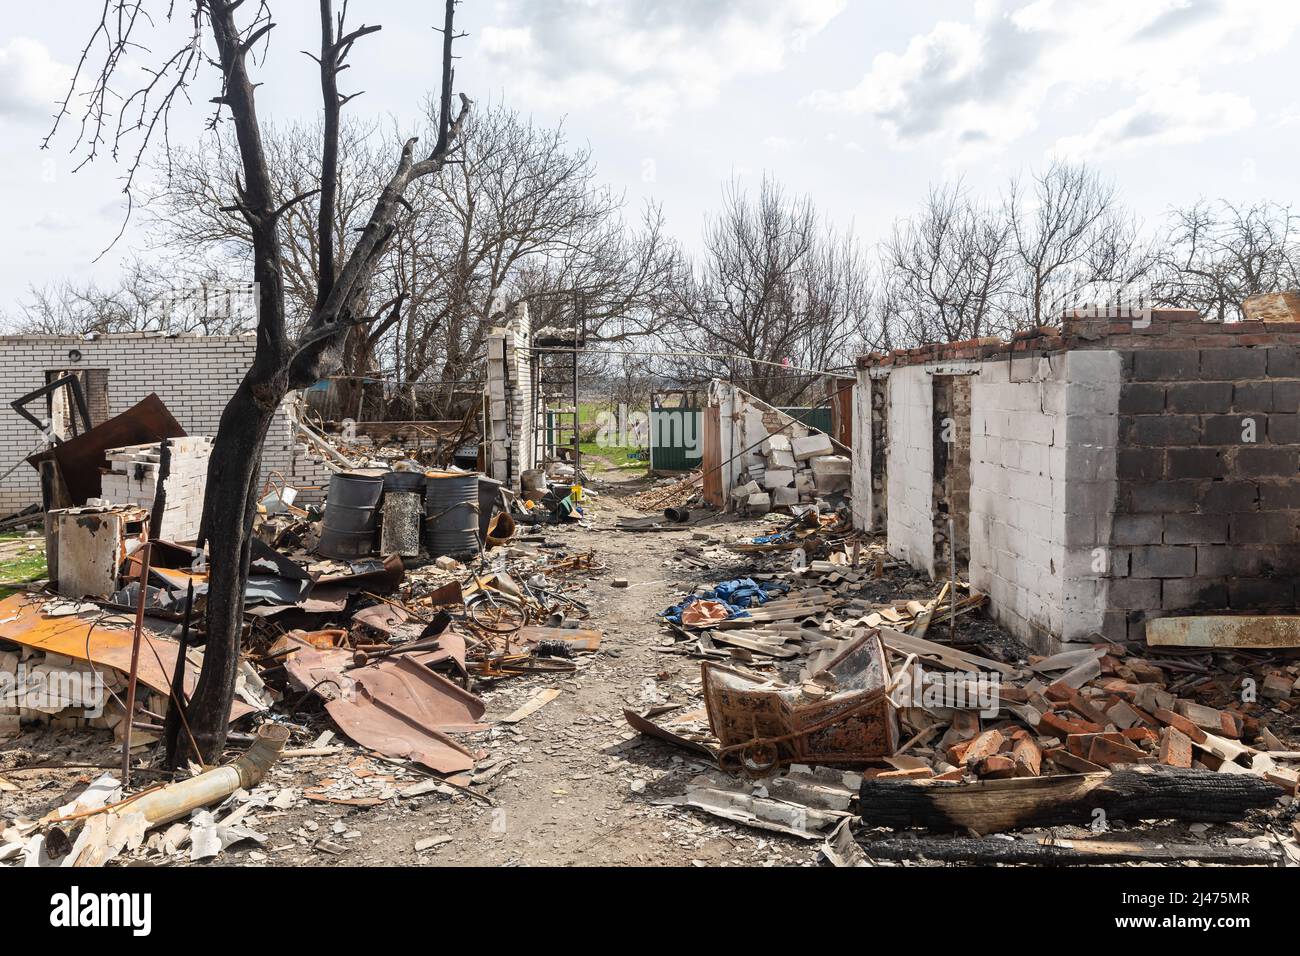 ANDRIIVKA, UKRAINE - Apr. 12, 2022: Chaos and devastation on the streets of Andriivka as a result of the attack of Russian invaders Stock Photo